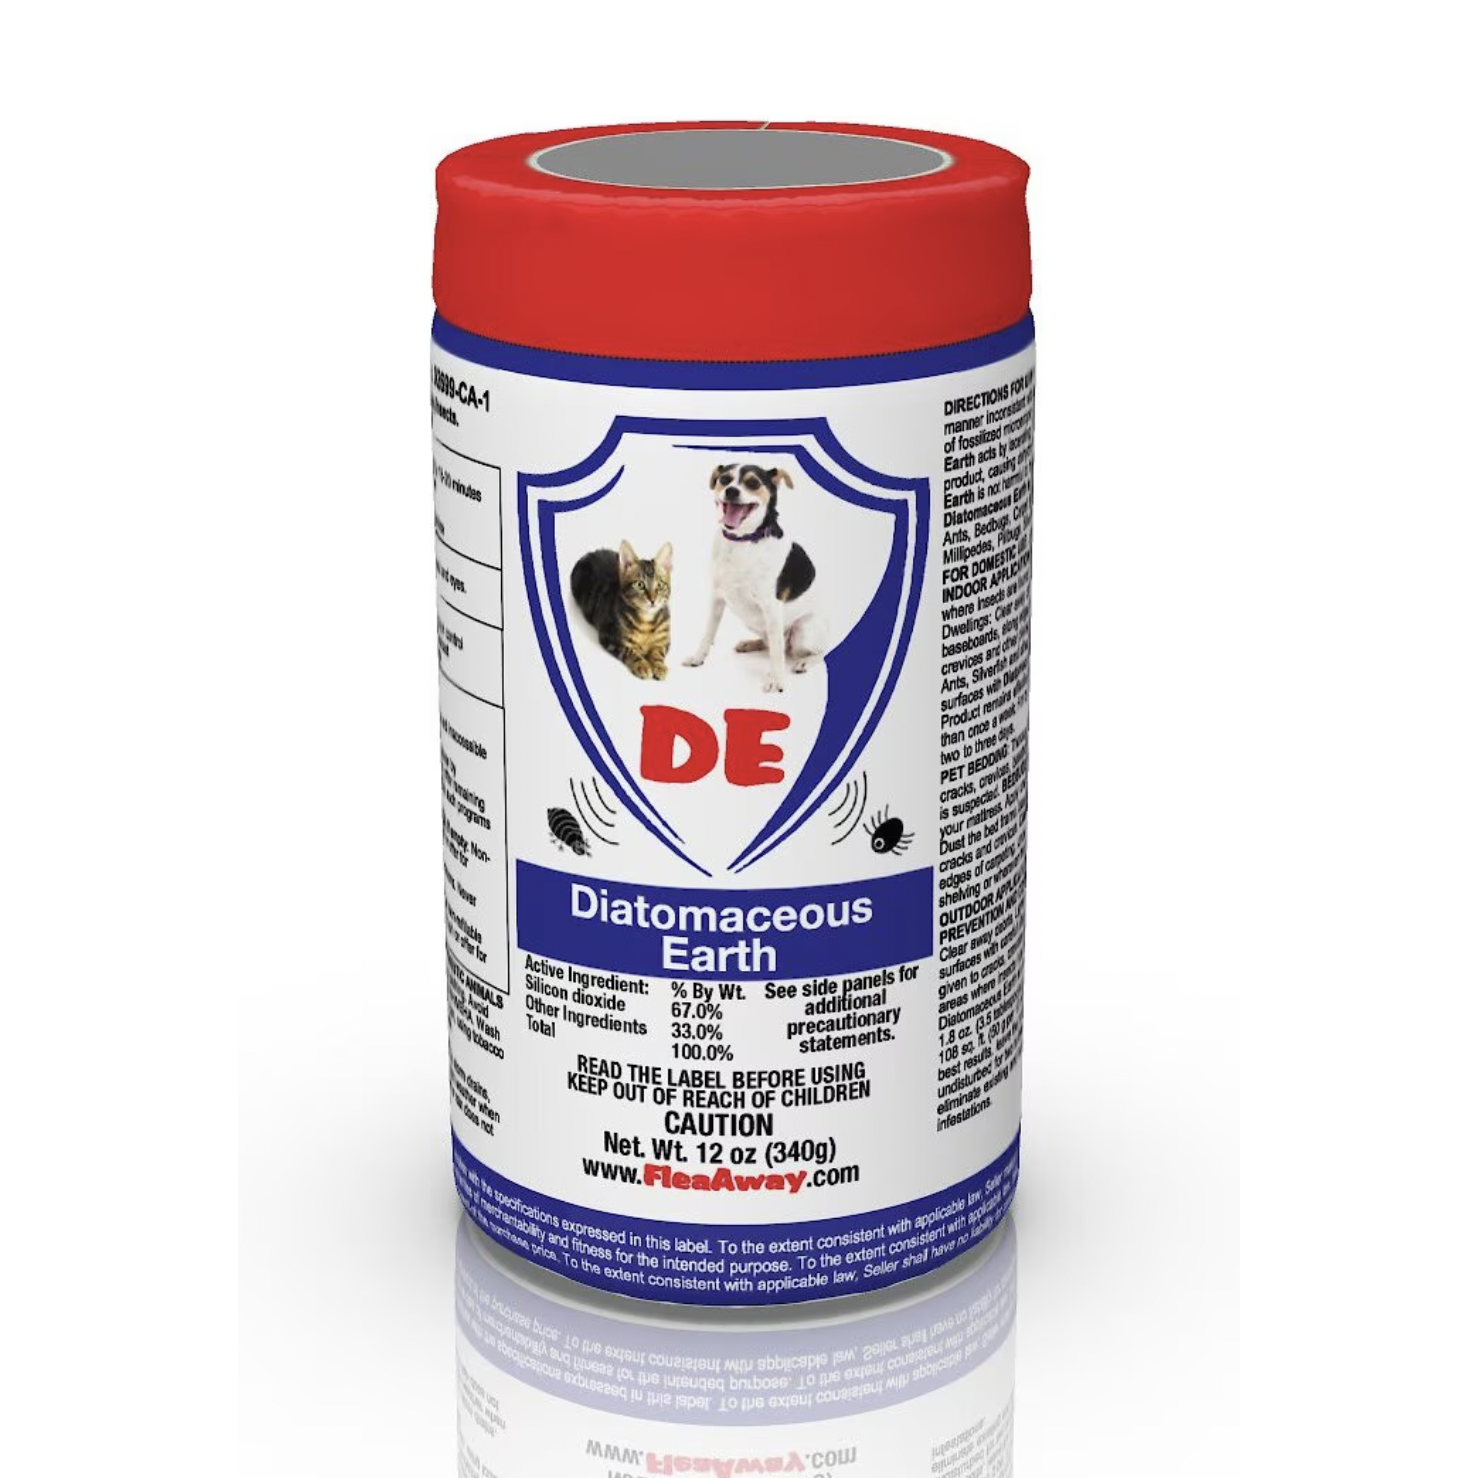 Flea Away Diatomaceous Earth for Dogs & Cat